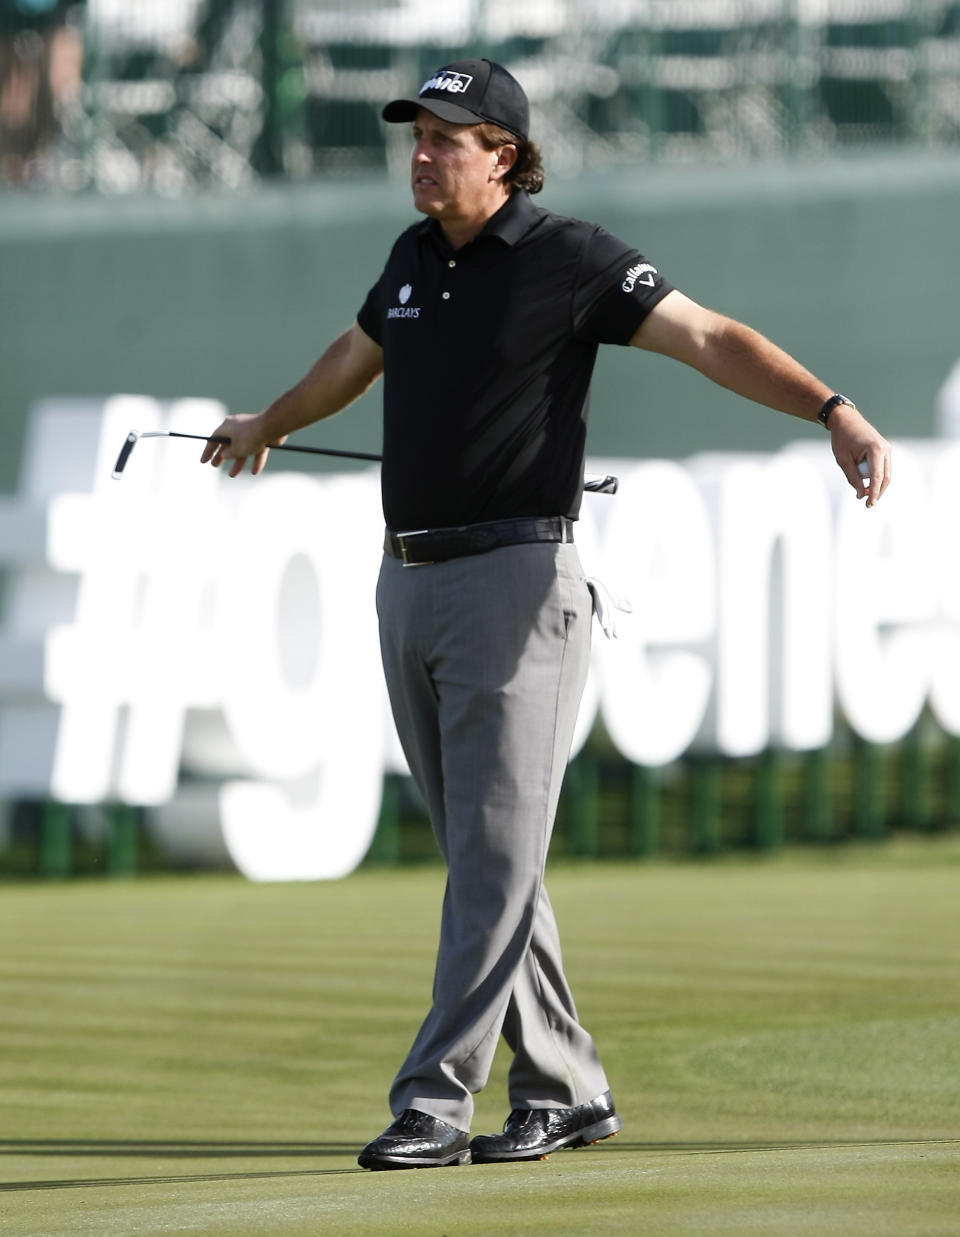 Phil Mickelson stretches on the 17th hole during the first round of the Waste Management Phoenix Open golf tournament on Thursday, Jan. 30, 2014, in Scottsdale, Ariz. (AP Photo/Rick Scuteri)